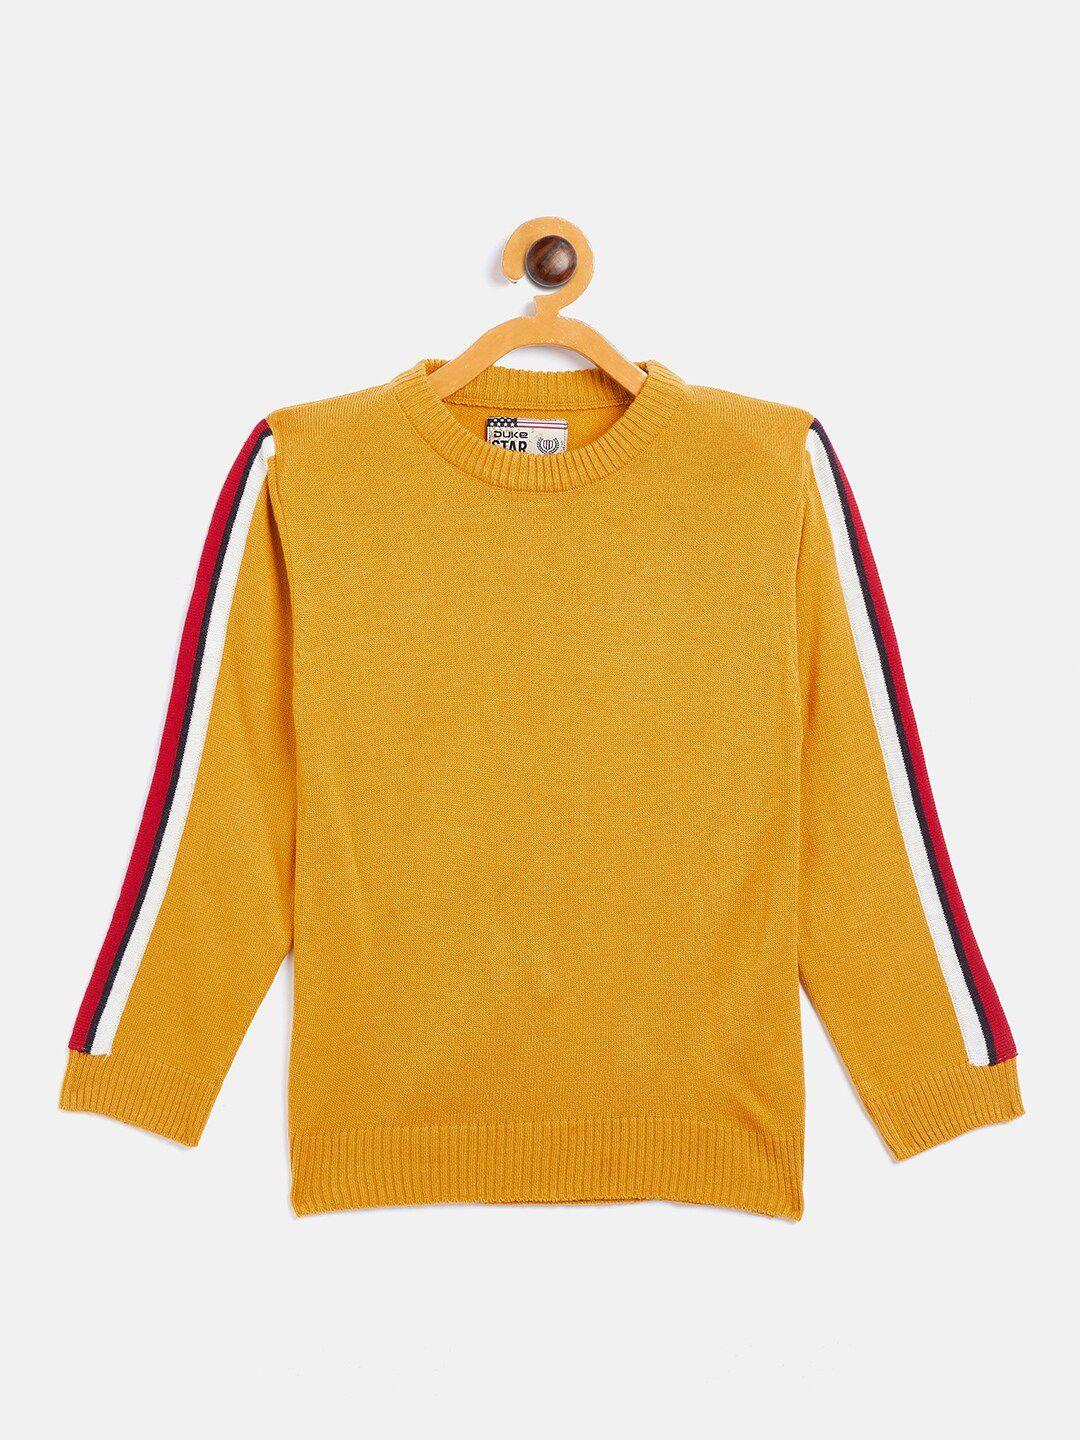 duke-boys-yellow-&-red-pullover-sweater